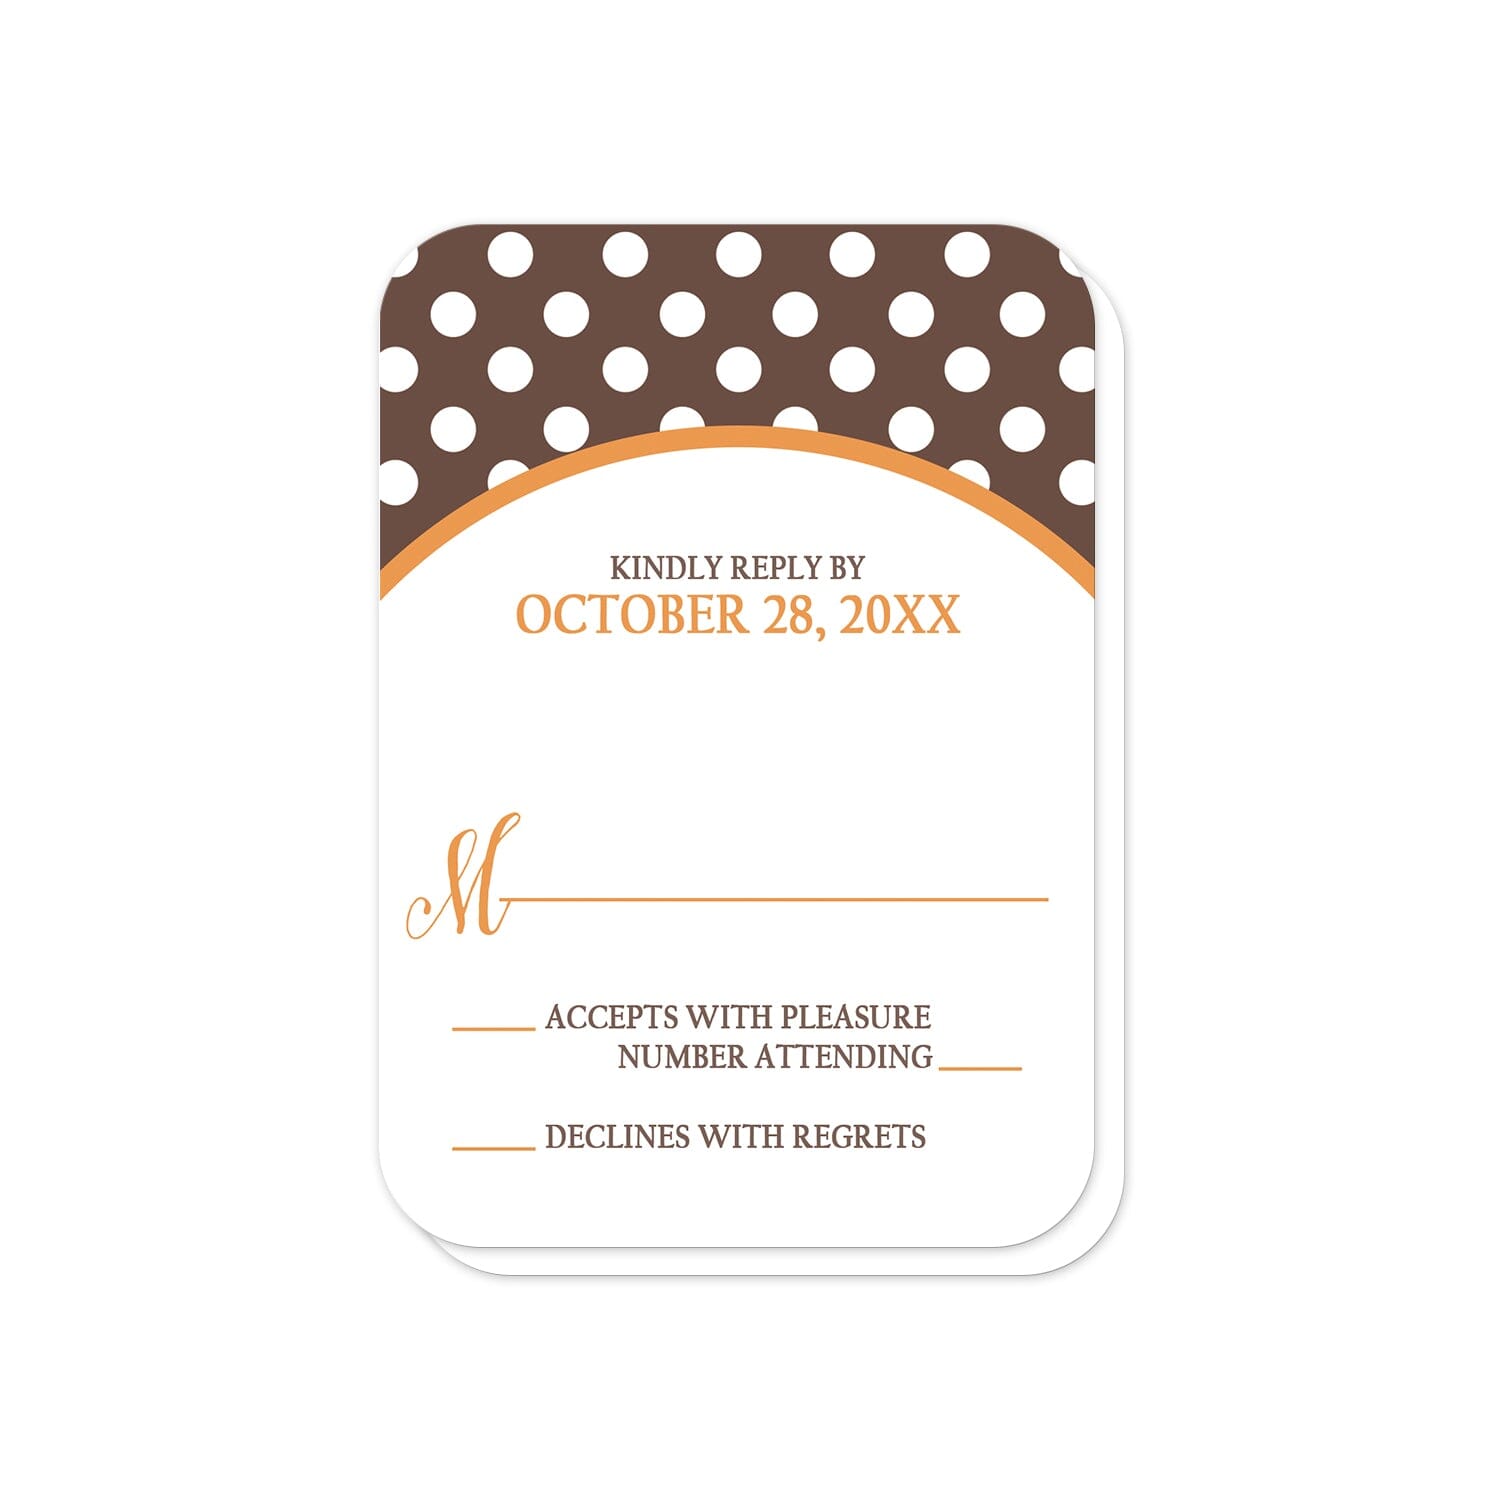 Orange Brown Polka Dot RSVP Cards Invitations (with rounded corners) at Artistically Invited.